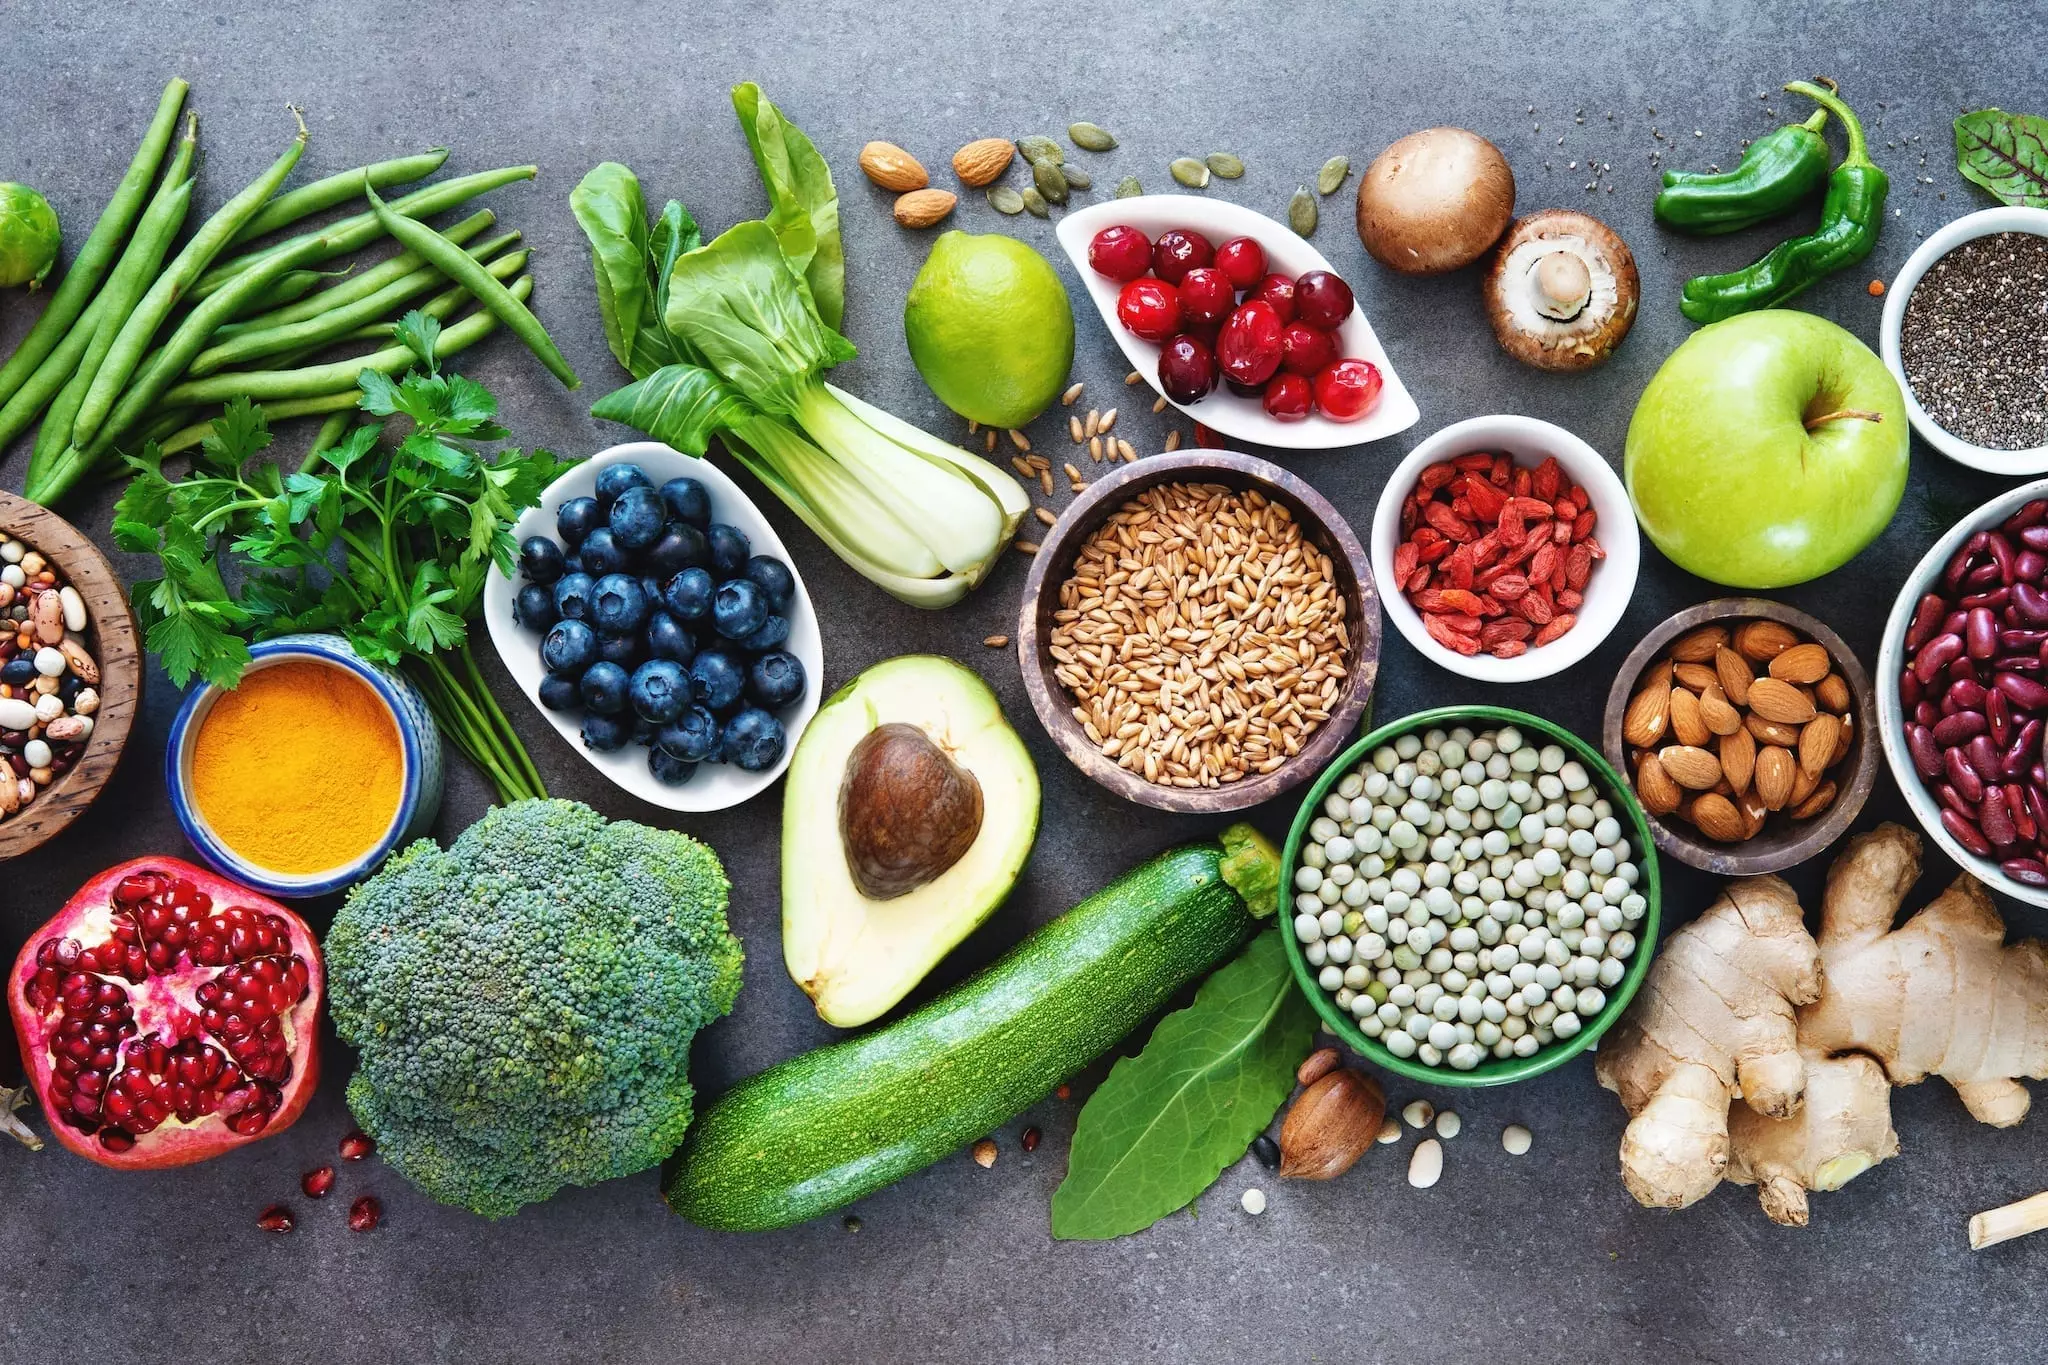 The benefits of a whole food diet to boost immune system health